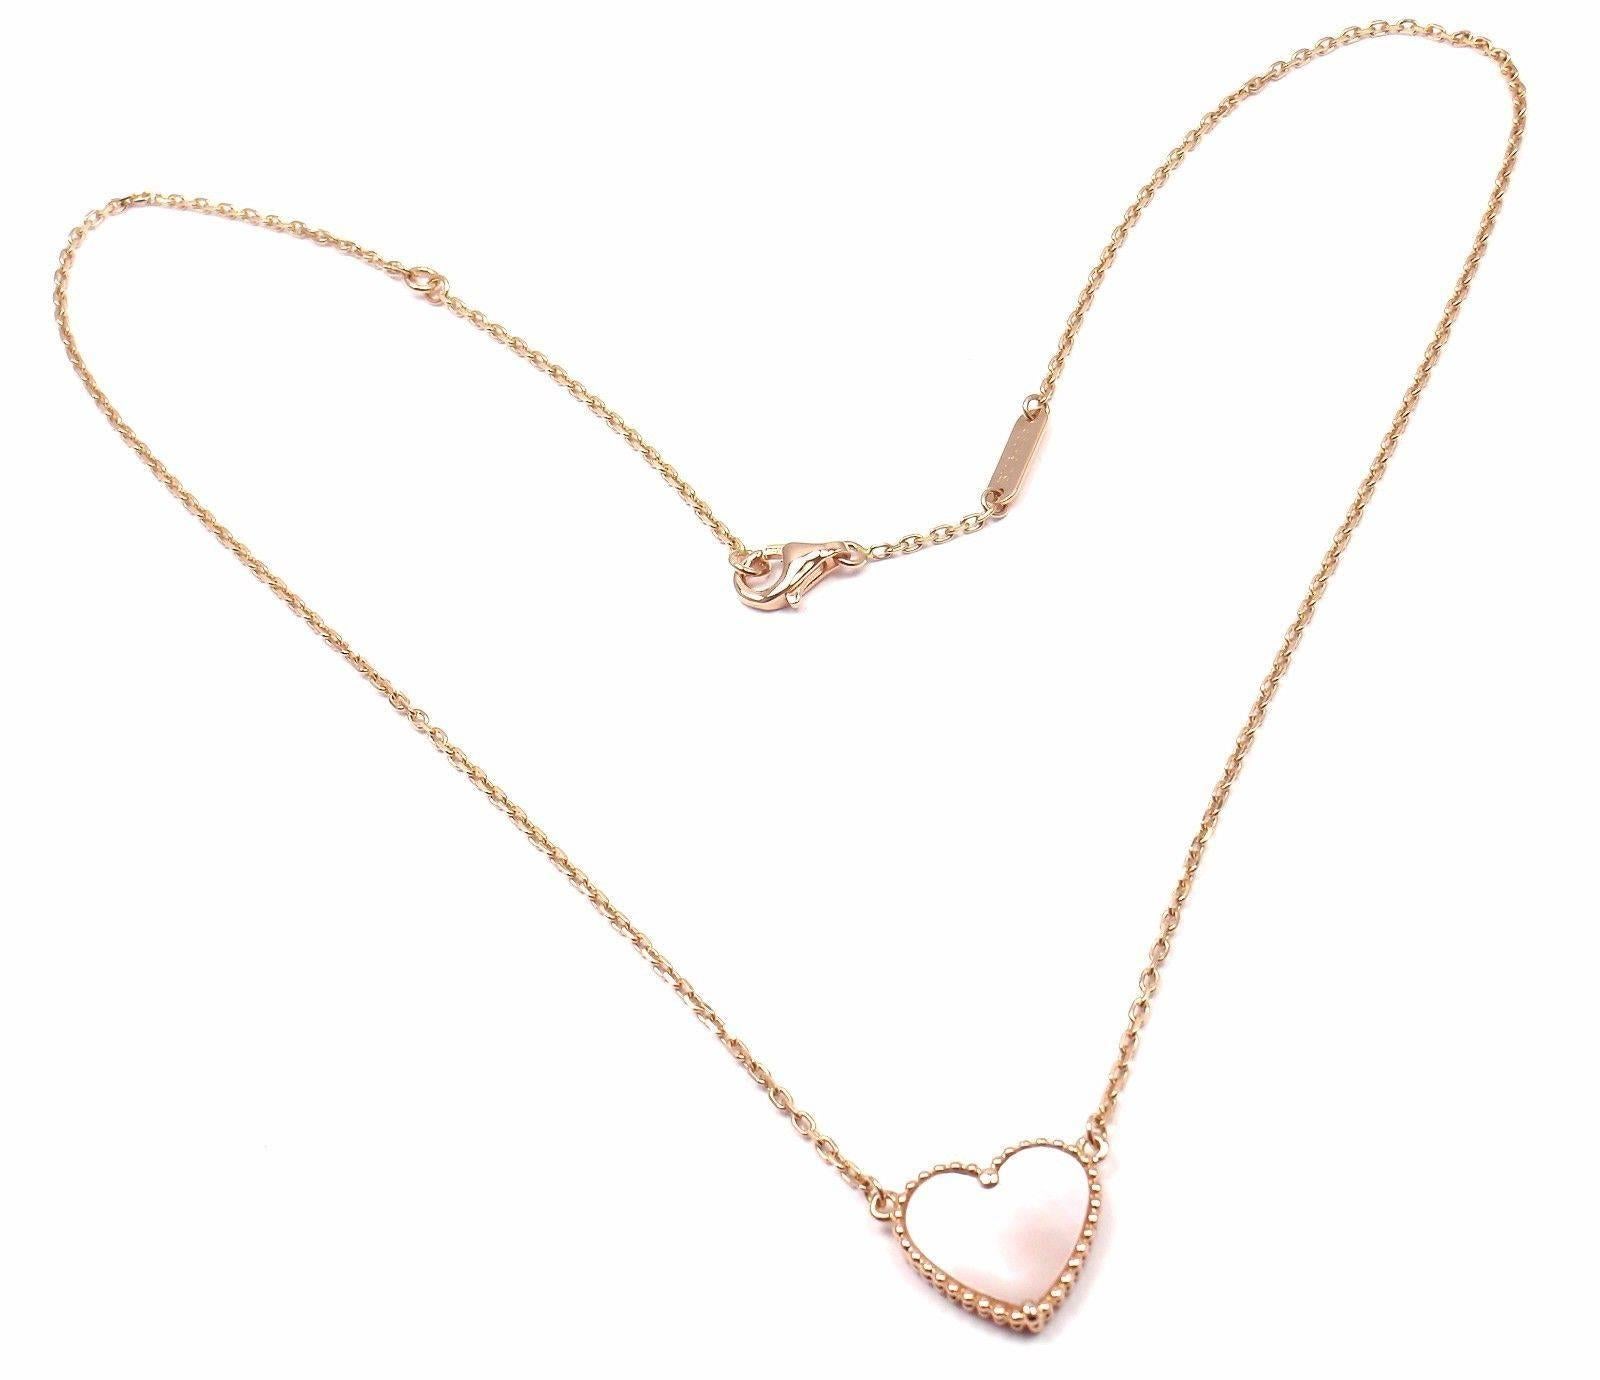 18k Rose Gold Mother Of Pearl Lucky Heart Necklace by Van Cleef & Arpels.  
With 1 heat shape mother of pearl pendant.

Details:  
Measurements: Length 16.5'' necklace
Width 1mm
Pendant: 12mm x 14mm
Weight: 4.4 grams
Stamped Hallmarks: VCA 750